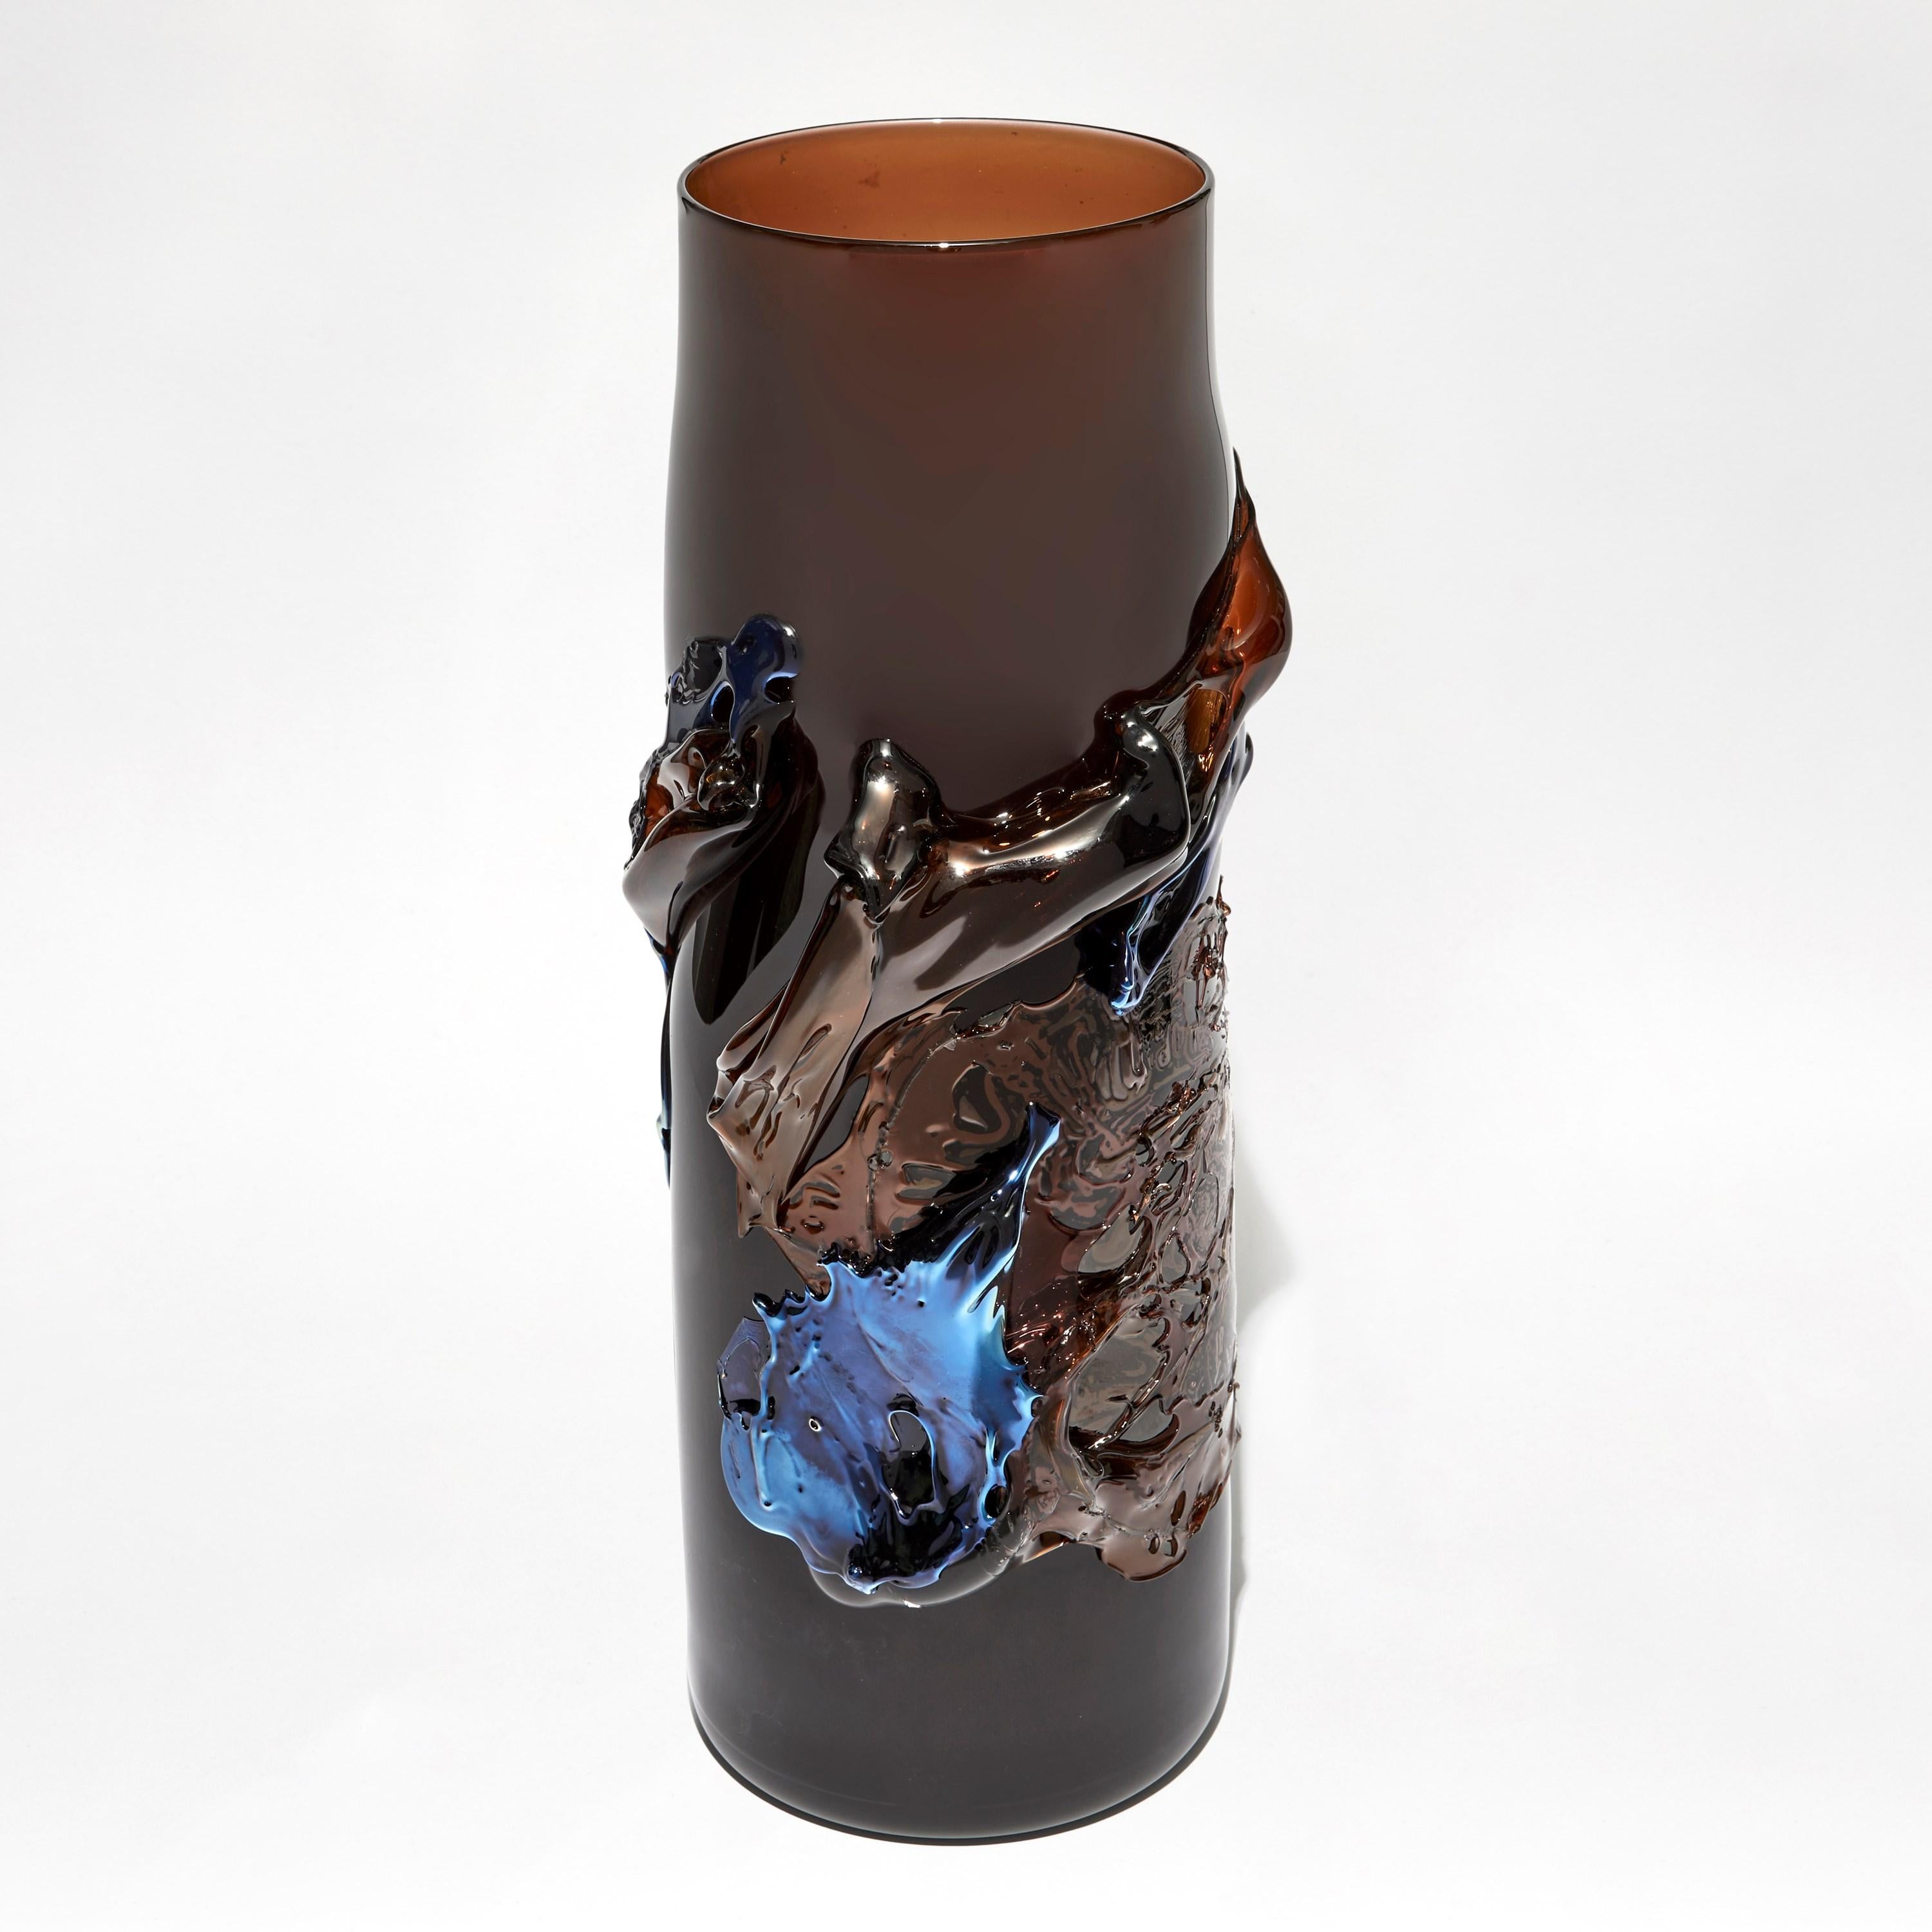 'Panorama in Dark Amber' is a unique artwork by the British artist, Bethany Wood. 

An equal passion for painting physically inspires how she controls and manipulates her glass. Recreating the fleeting nature of brush strokes, Wood’s molten